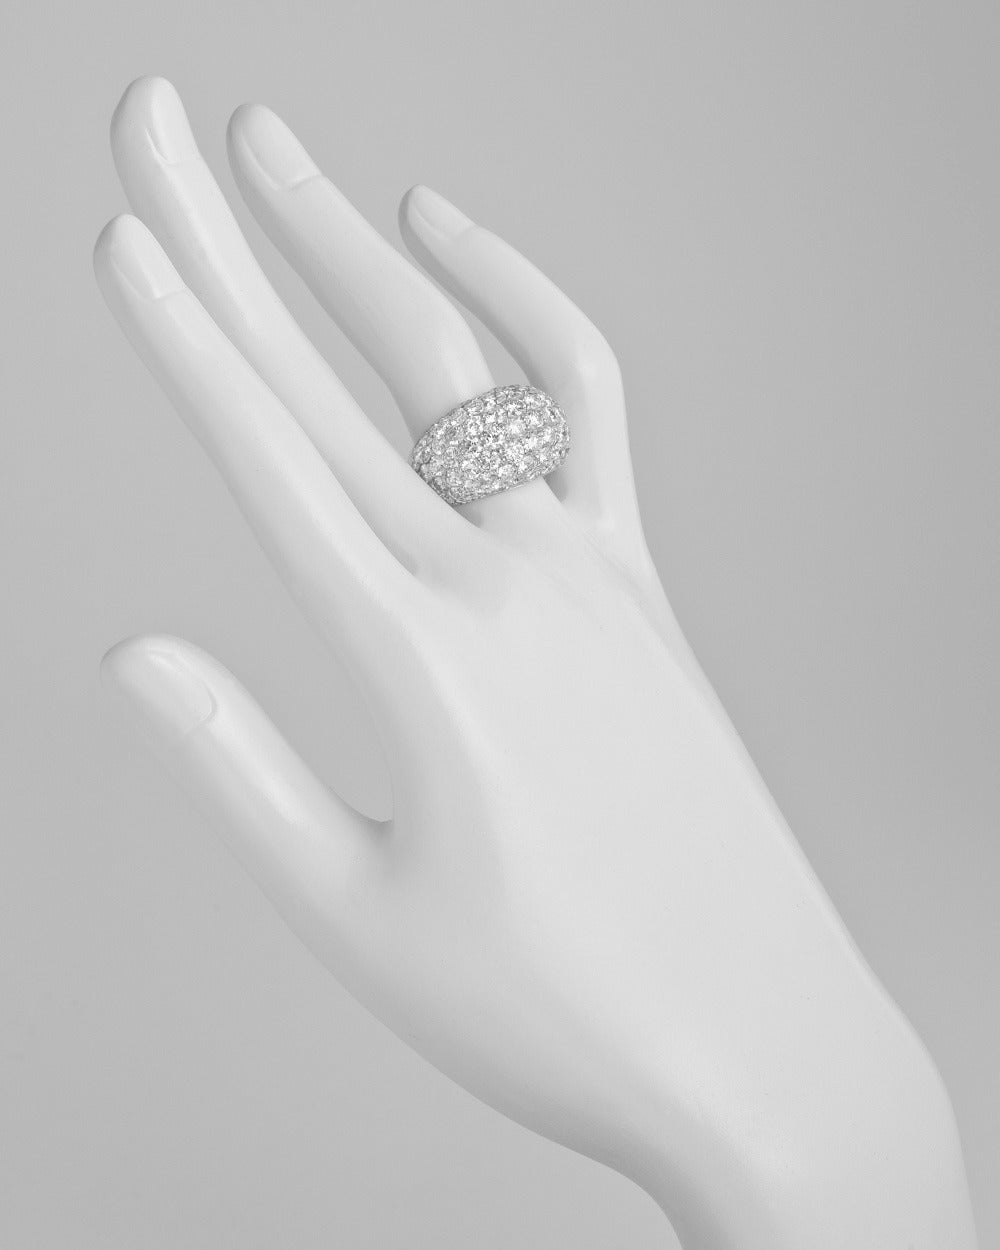 Pave diamond dome ring, set with 7-rows of near-colorless round diamonds weighing approximately 5.60 total carats (F-G color/VS-SI clarity), mounted in platinum. Size 6.25.